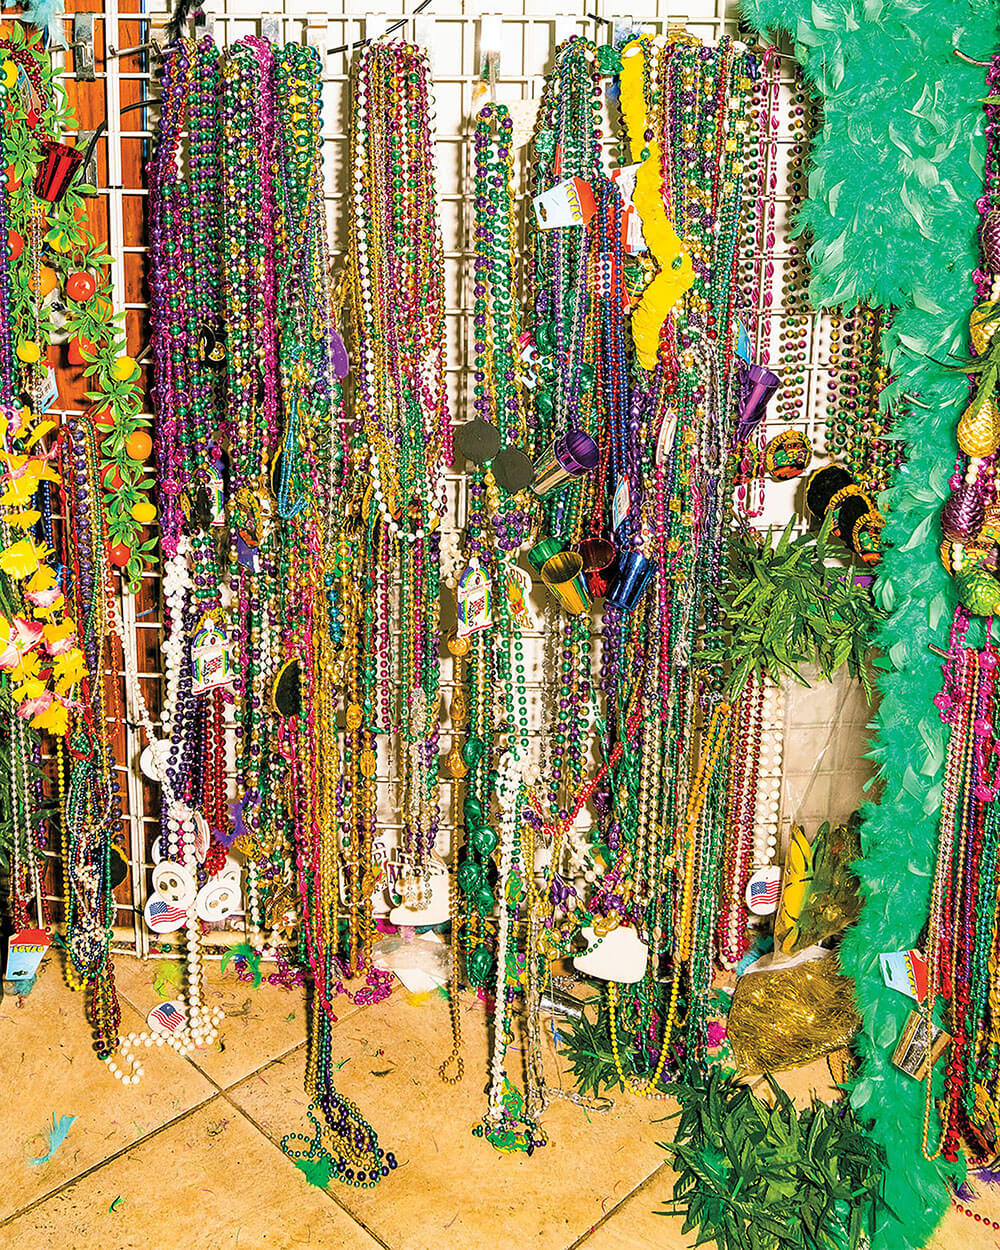 A large assortment of brightly-colored Mardi Gras beads